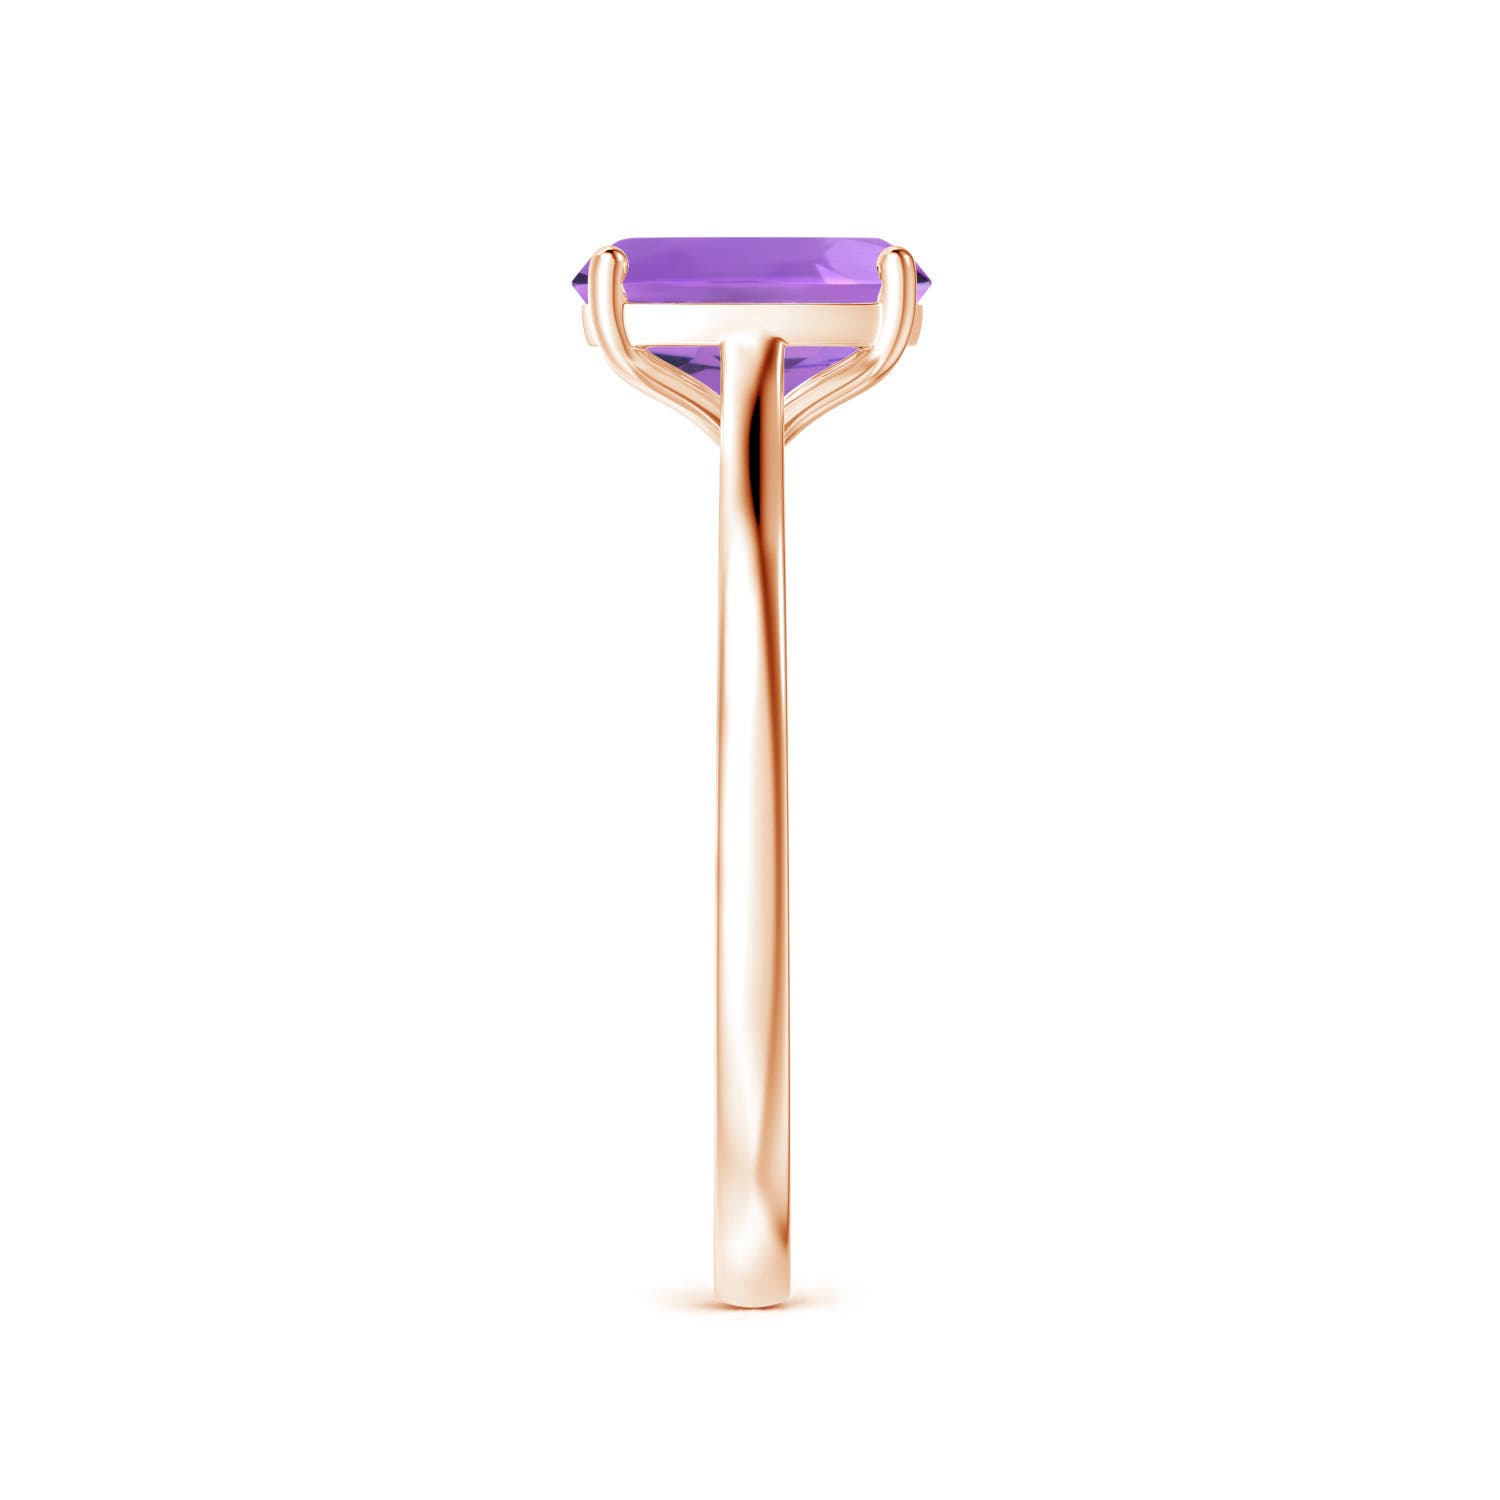 AA - Amethyst / 1.2 CT / 14 KT Rose Gold